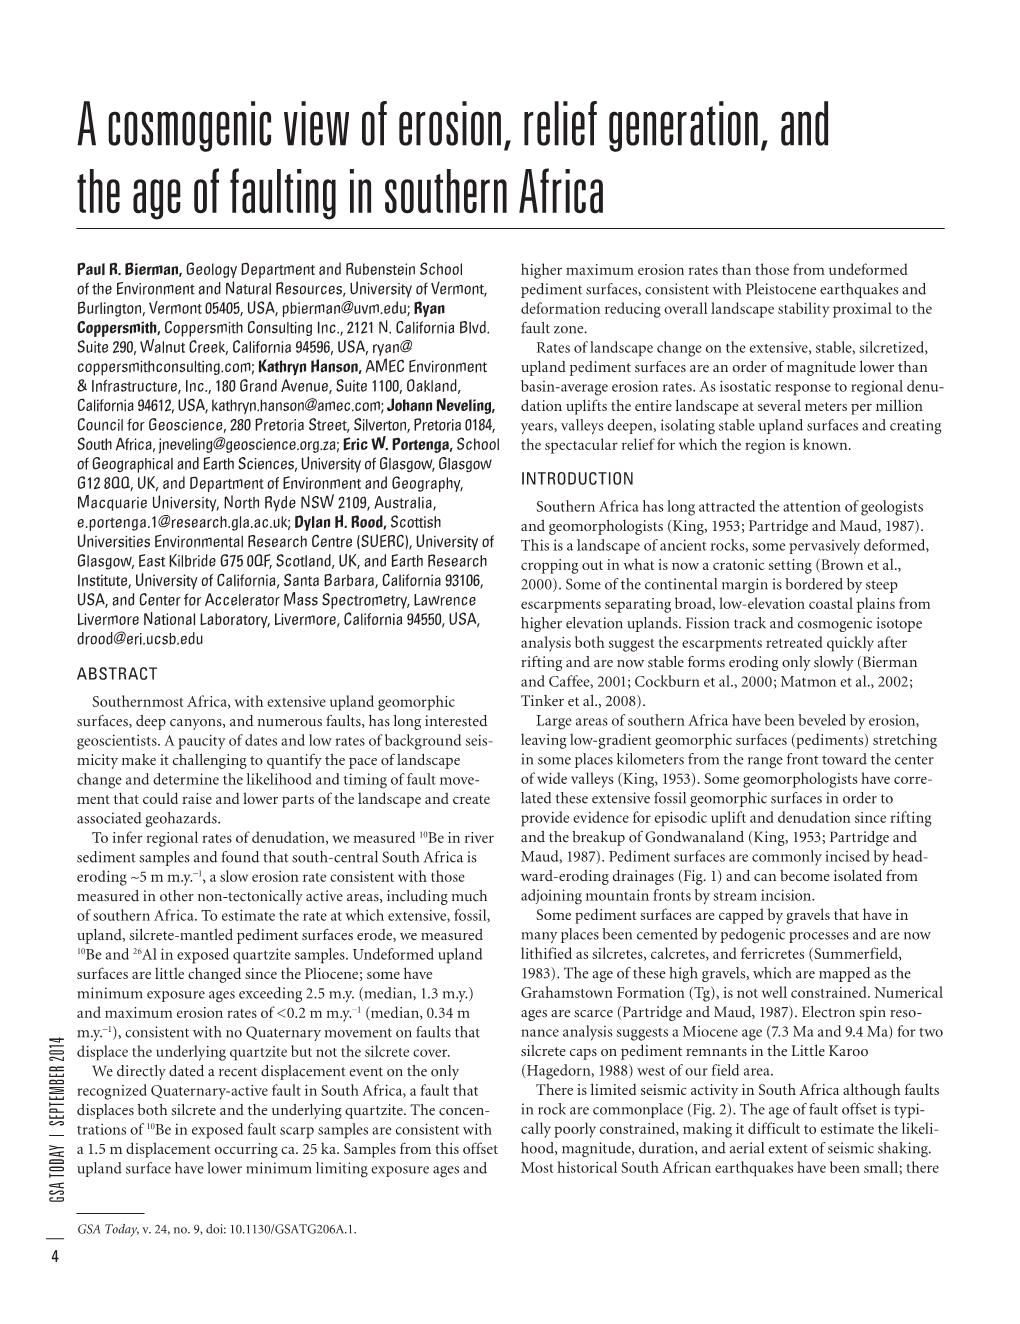 A Cosmogenic View of Erosion, Relief Generation, and the Age of Faulting in Southern Africa